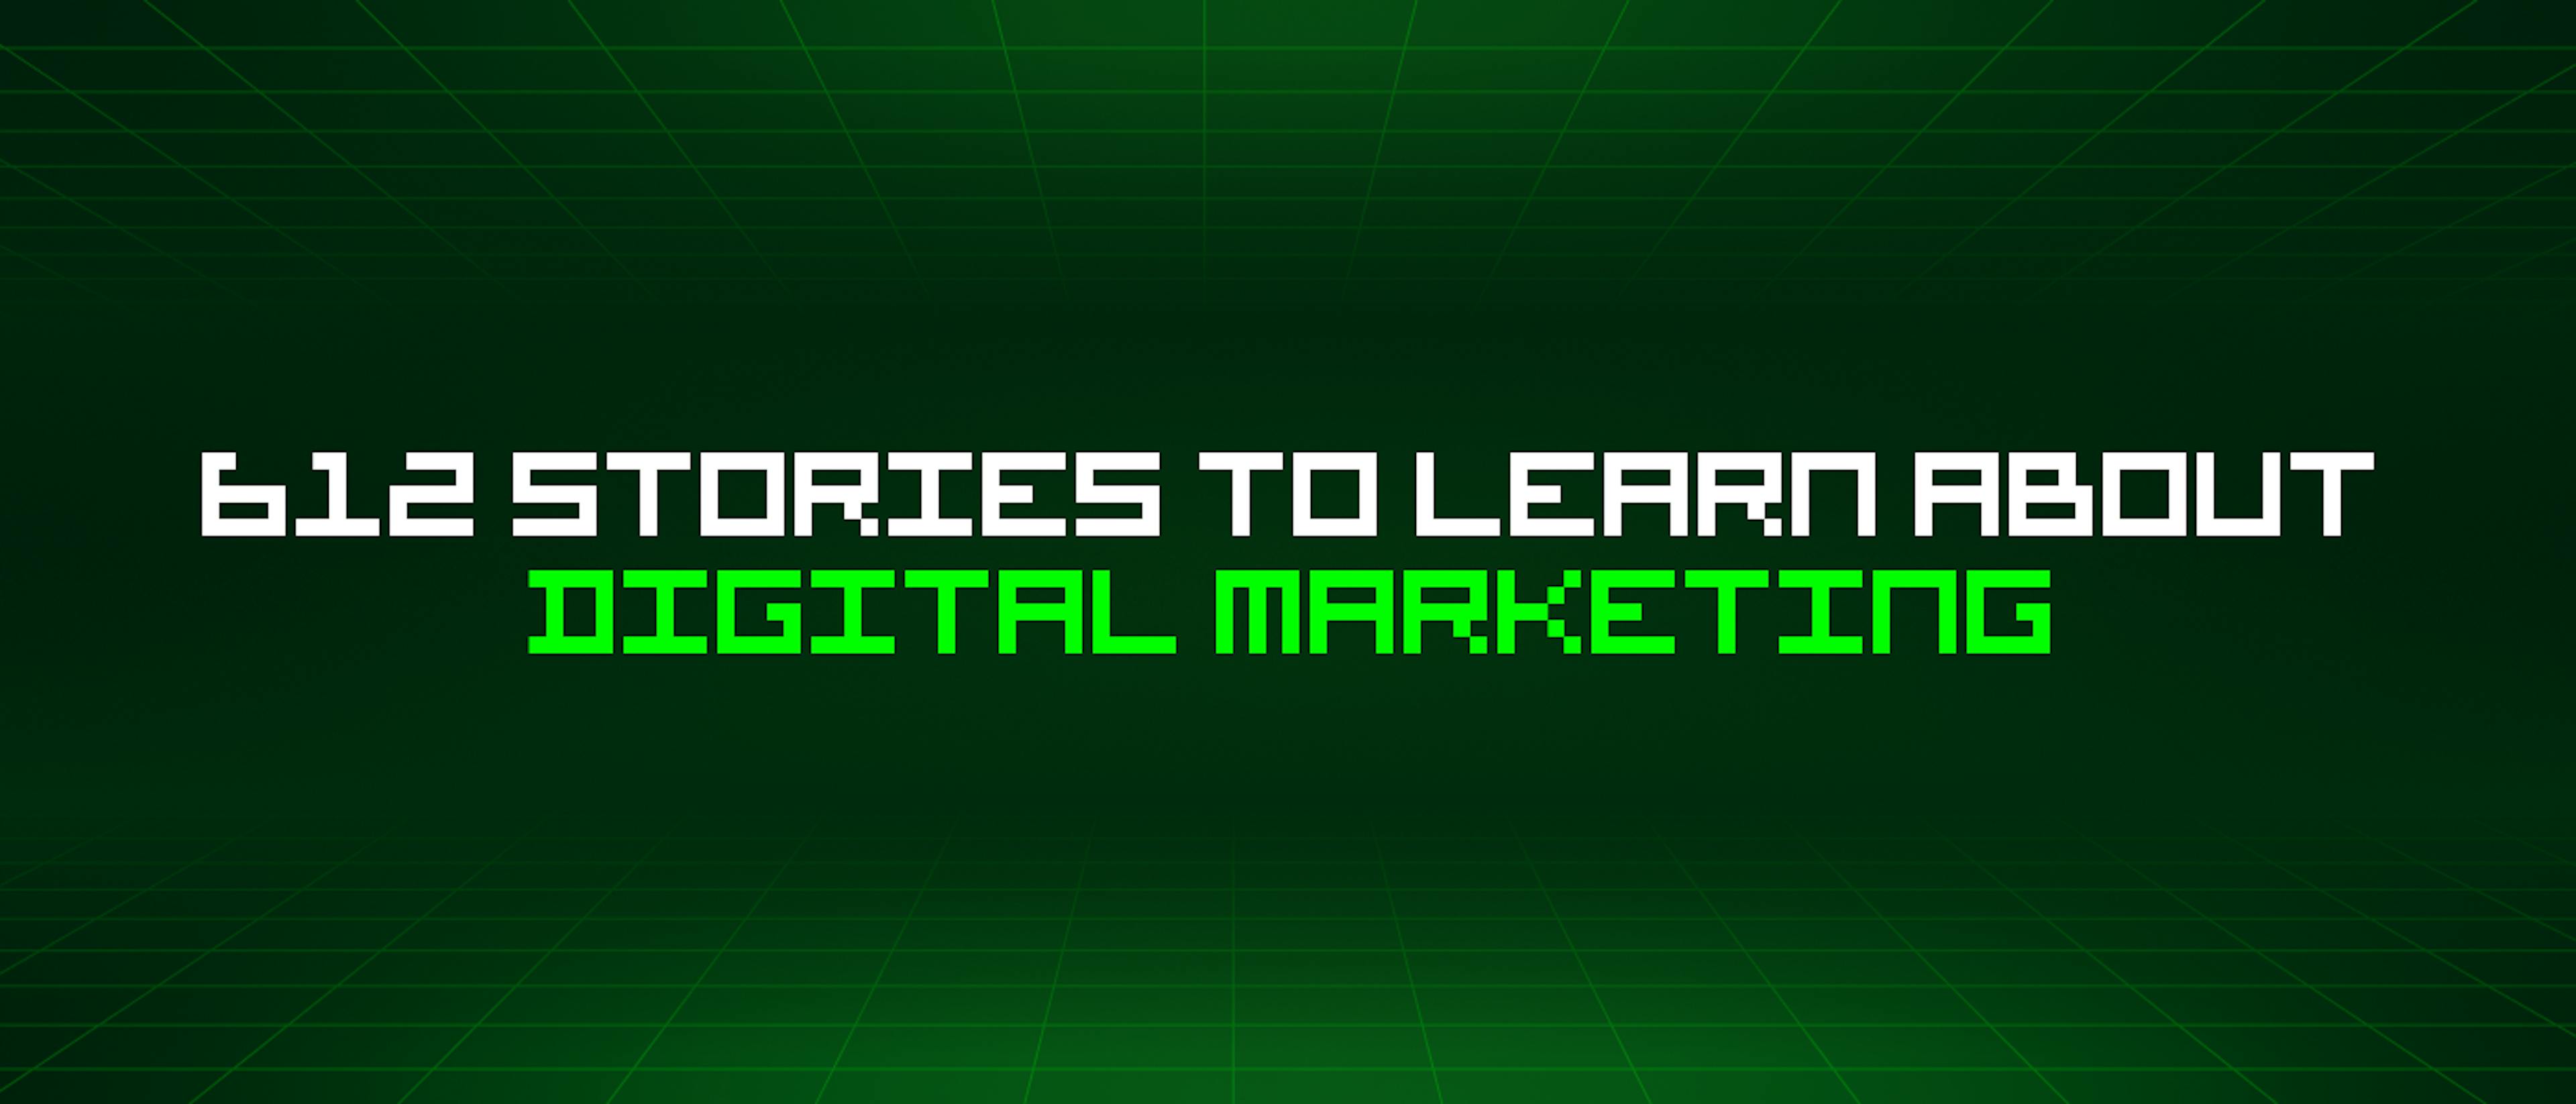 featured image - 612 Stories To Learn About Digital Marketing